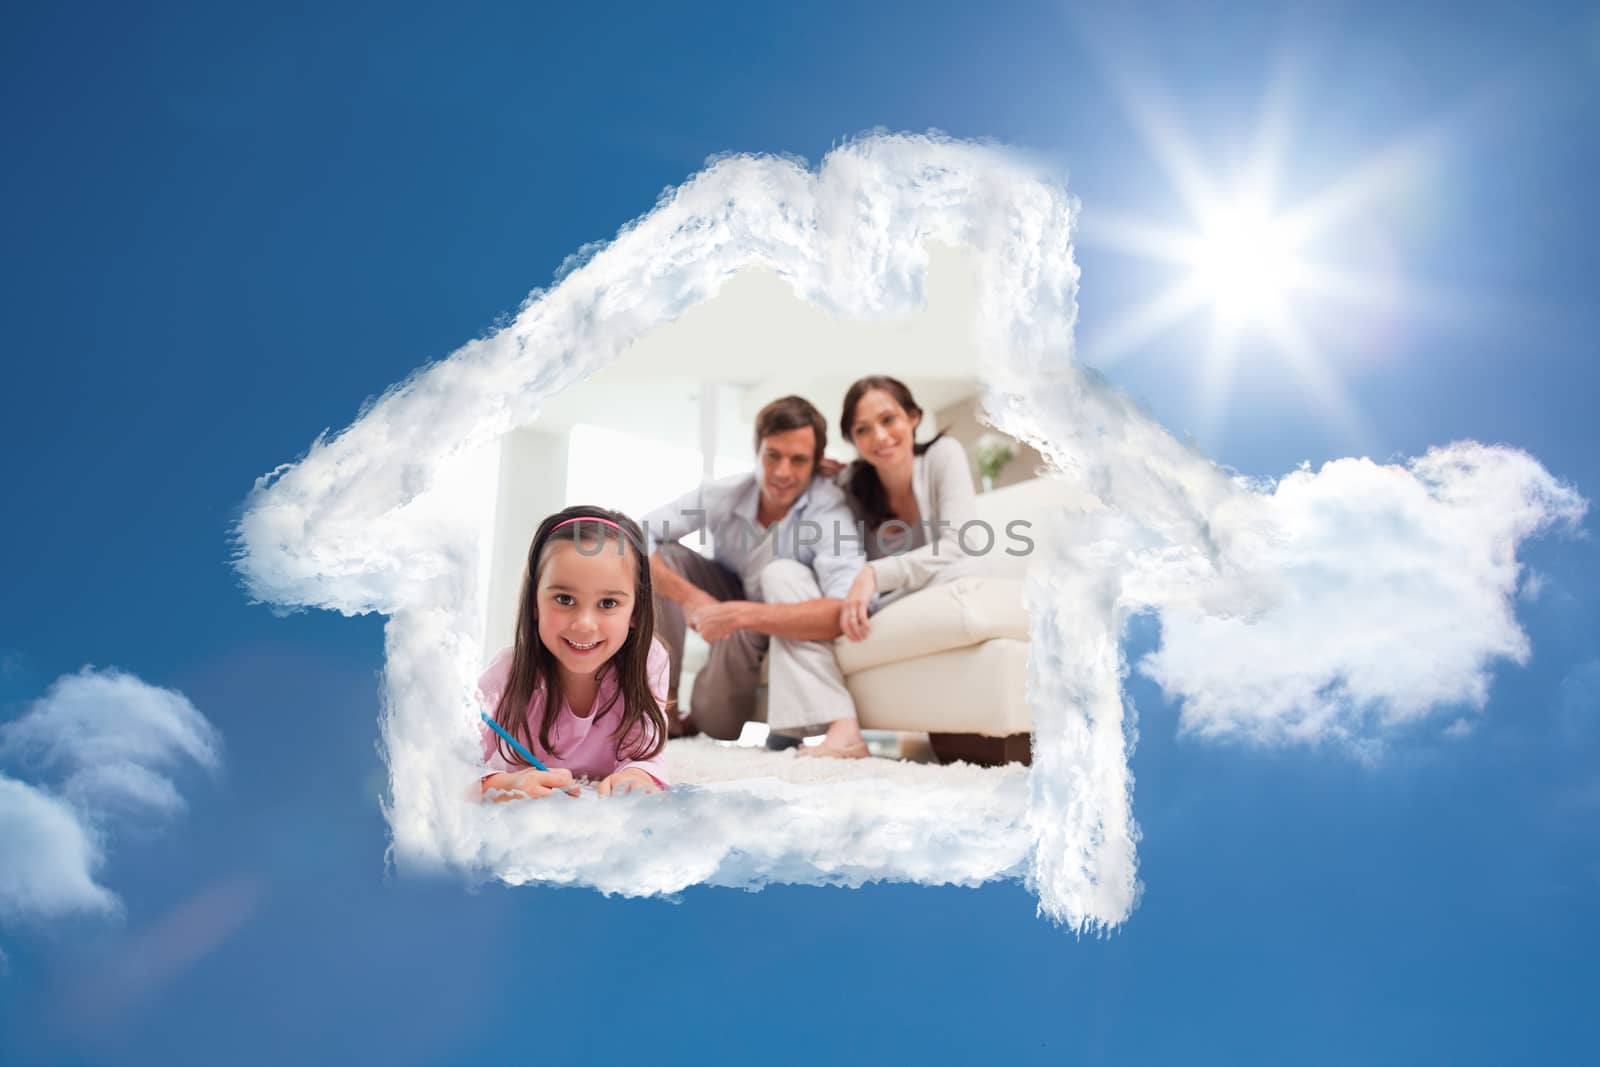 Cute girl drawing with her parents in the background against bright blue sky with clouds